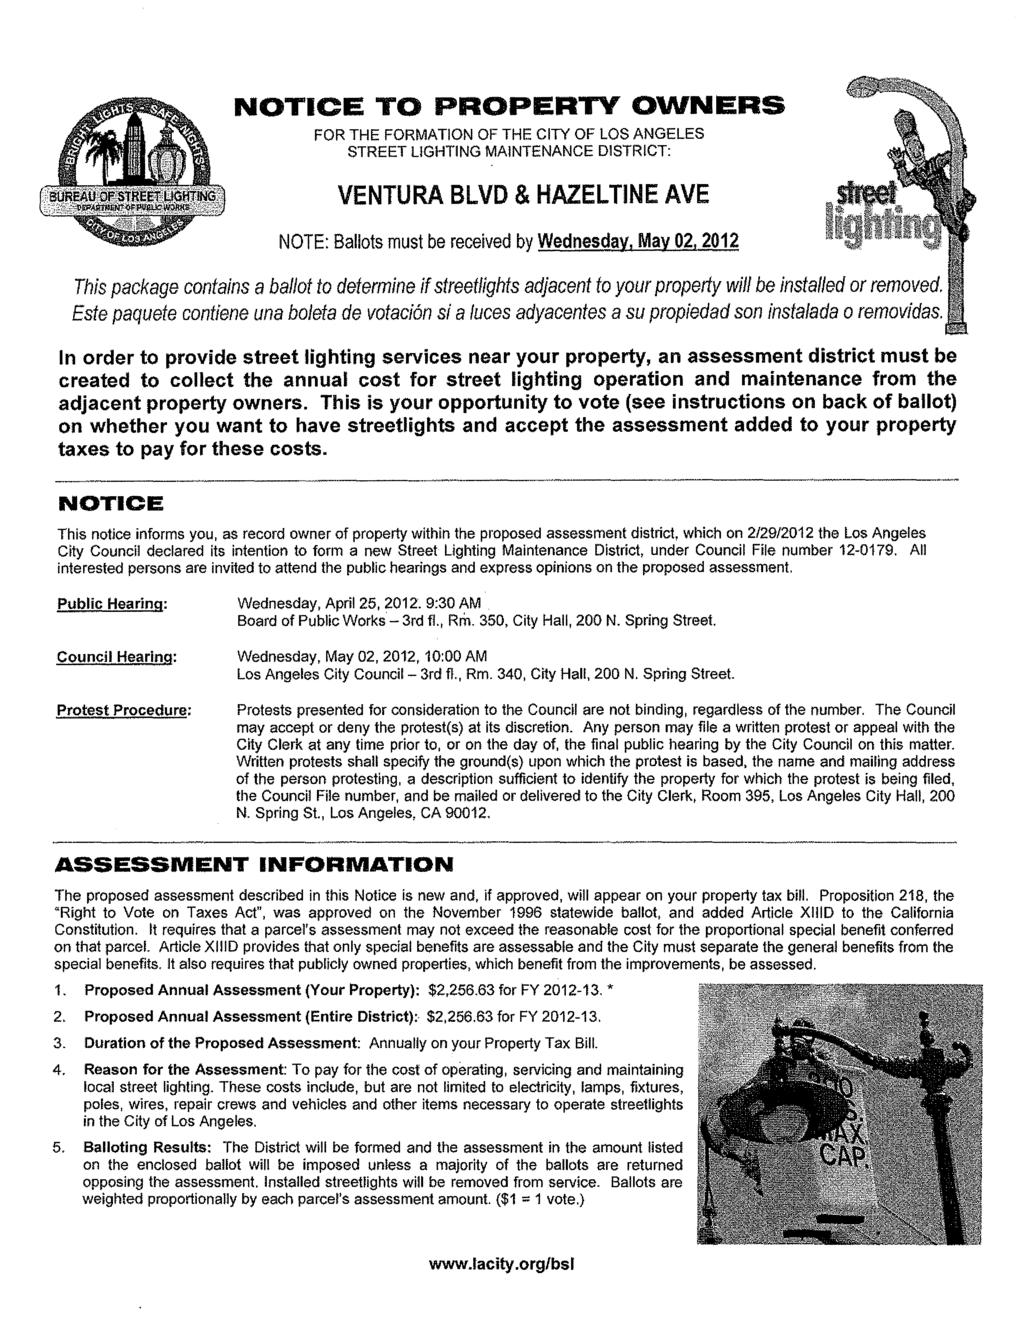 NOTICE TO PROPERTY OWNERS FOR THE FORMATION OF THE CITY OF LOS ANGELES STREET LIGHTING MAINTENANCE DISTRICT: VENTURA BLVD & HAZELTINE AVE NOTE: Ballots must be received by Wednesday, May 02,2012 This